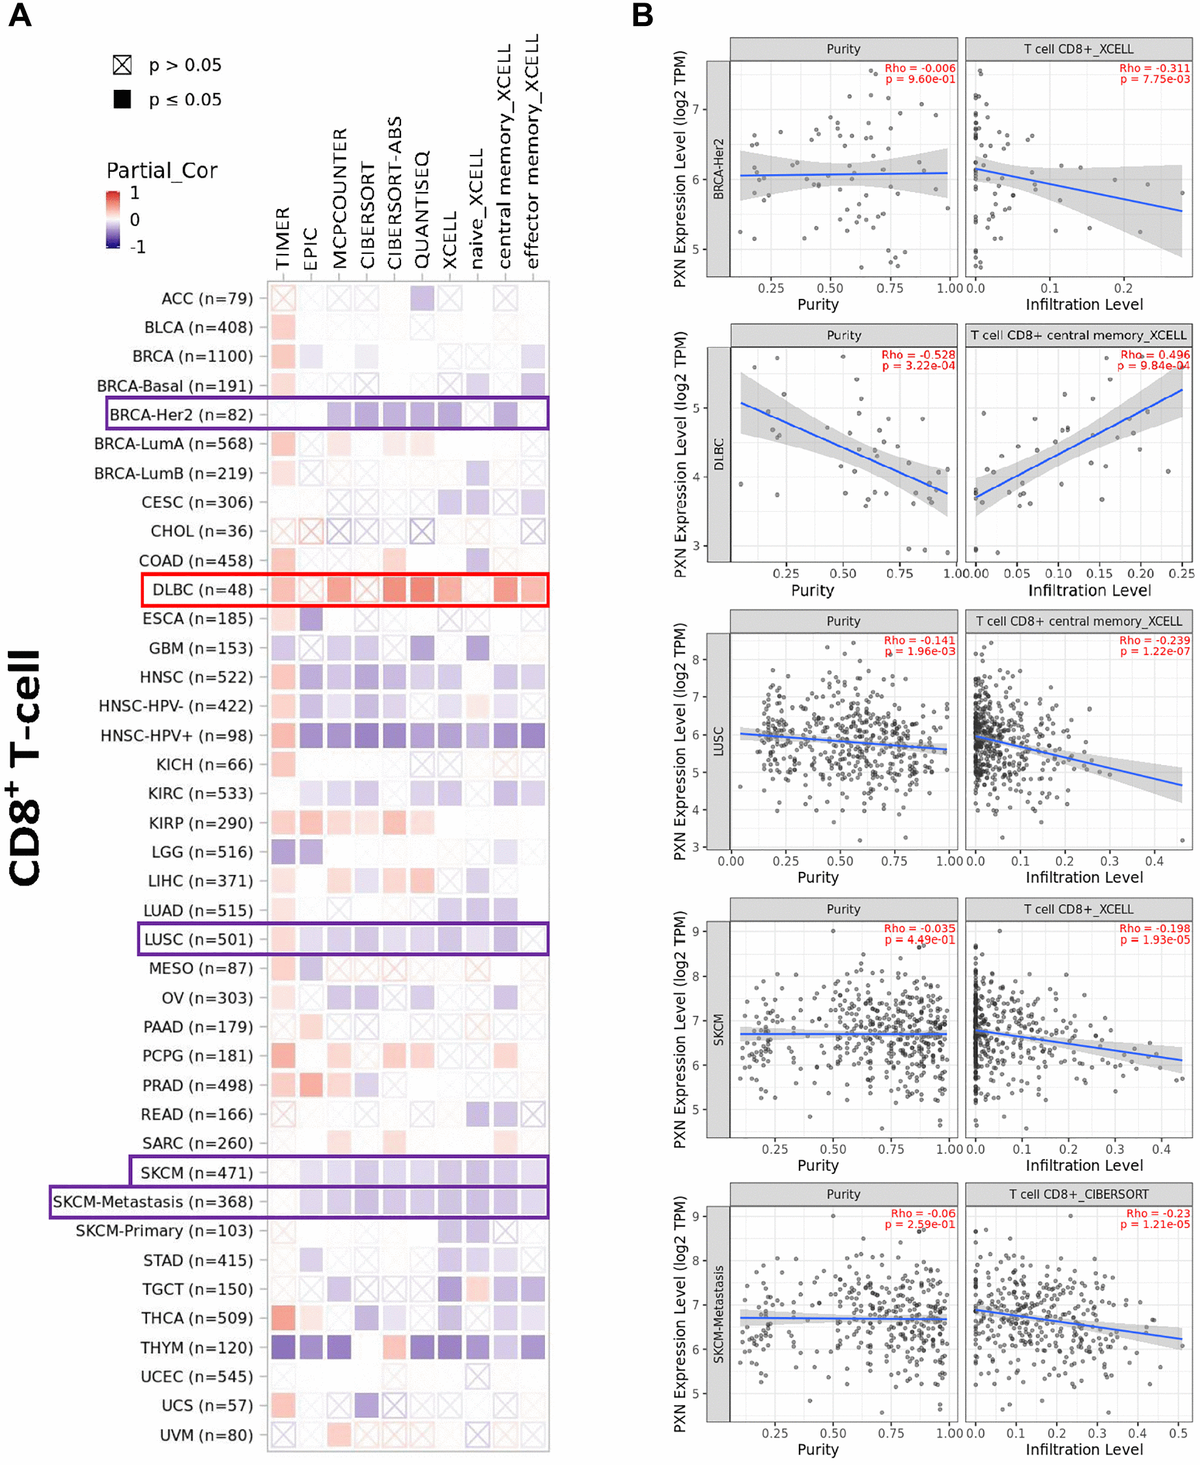 Correlation analysis between PXN gene expression and immune infiltration of CD8+ T cells. Different algorithms explored potential correlations in (A) PXN expression level and (B) infiltration of CD8+ T cells across all types of cancer in TCGA.